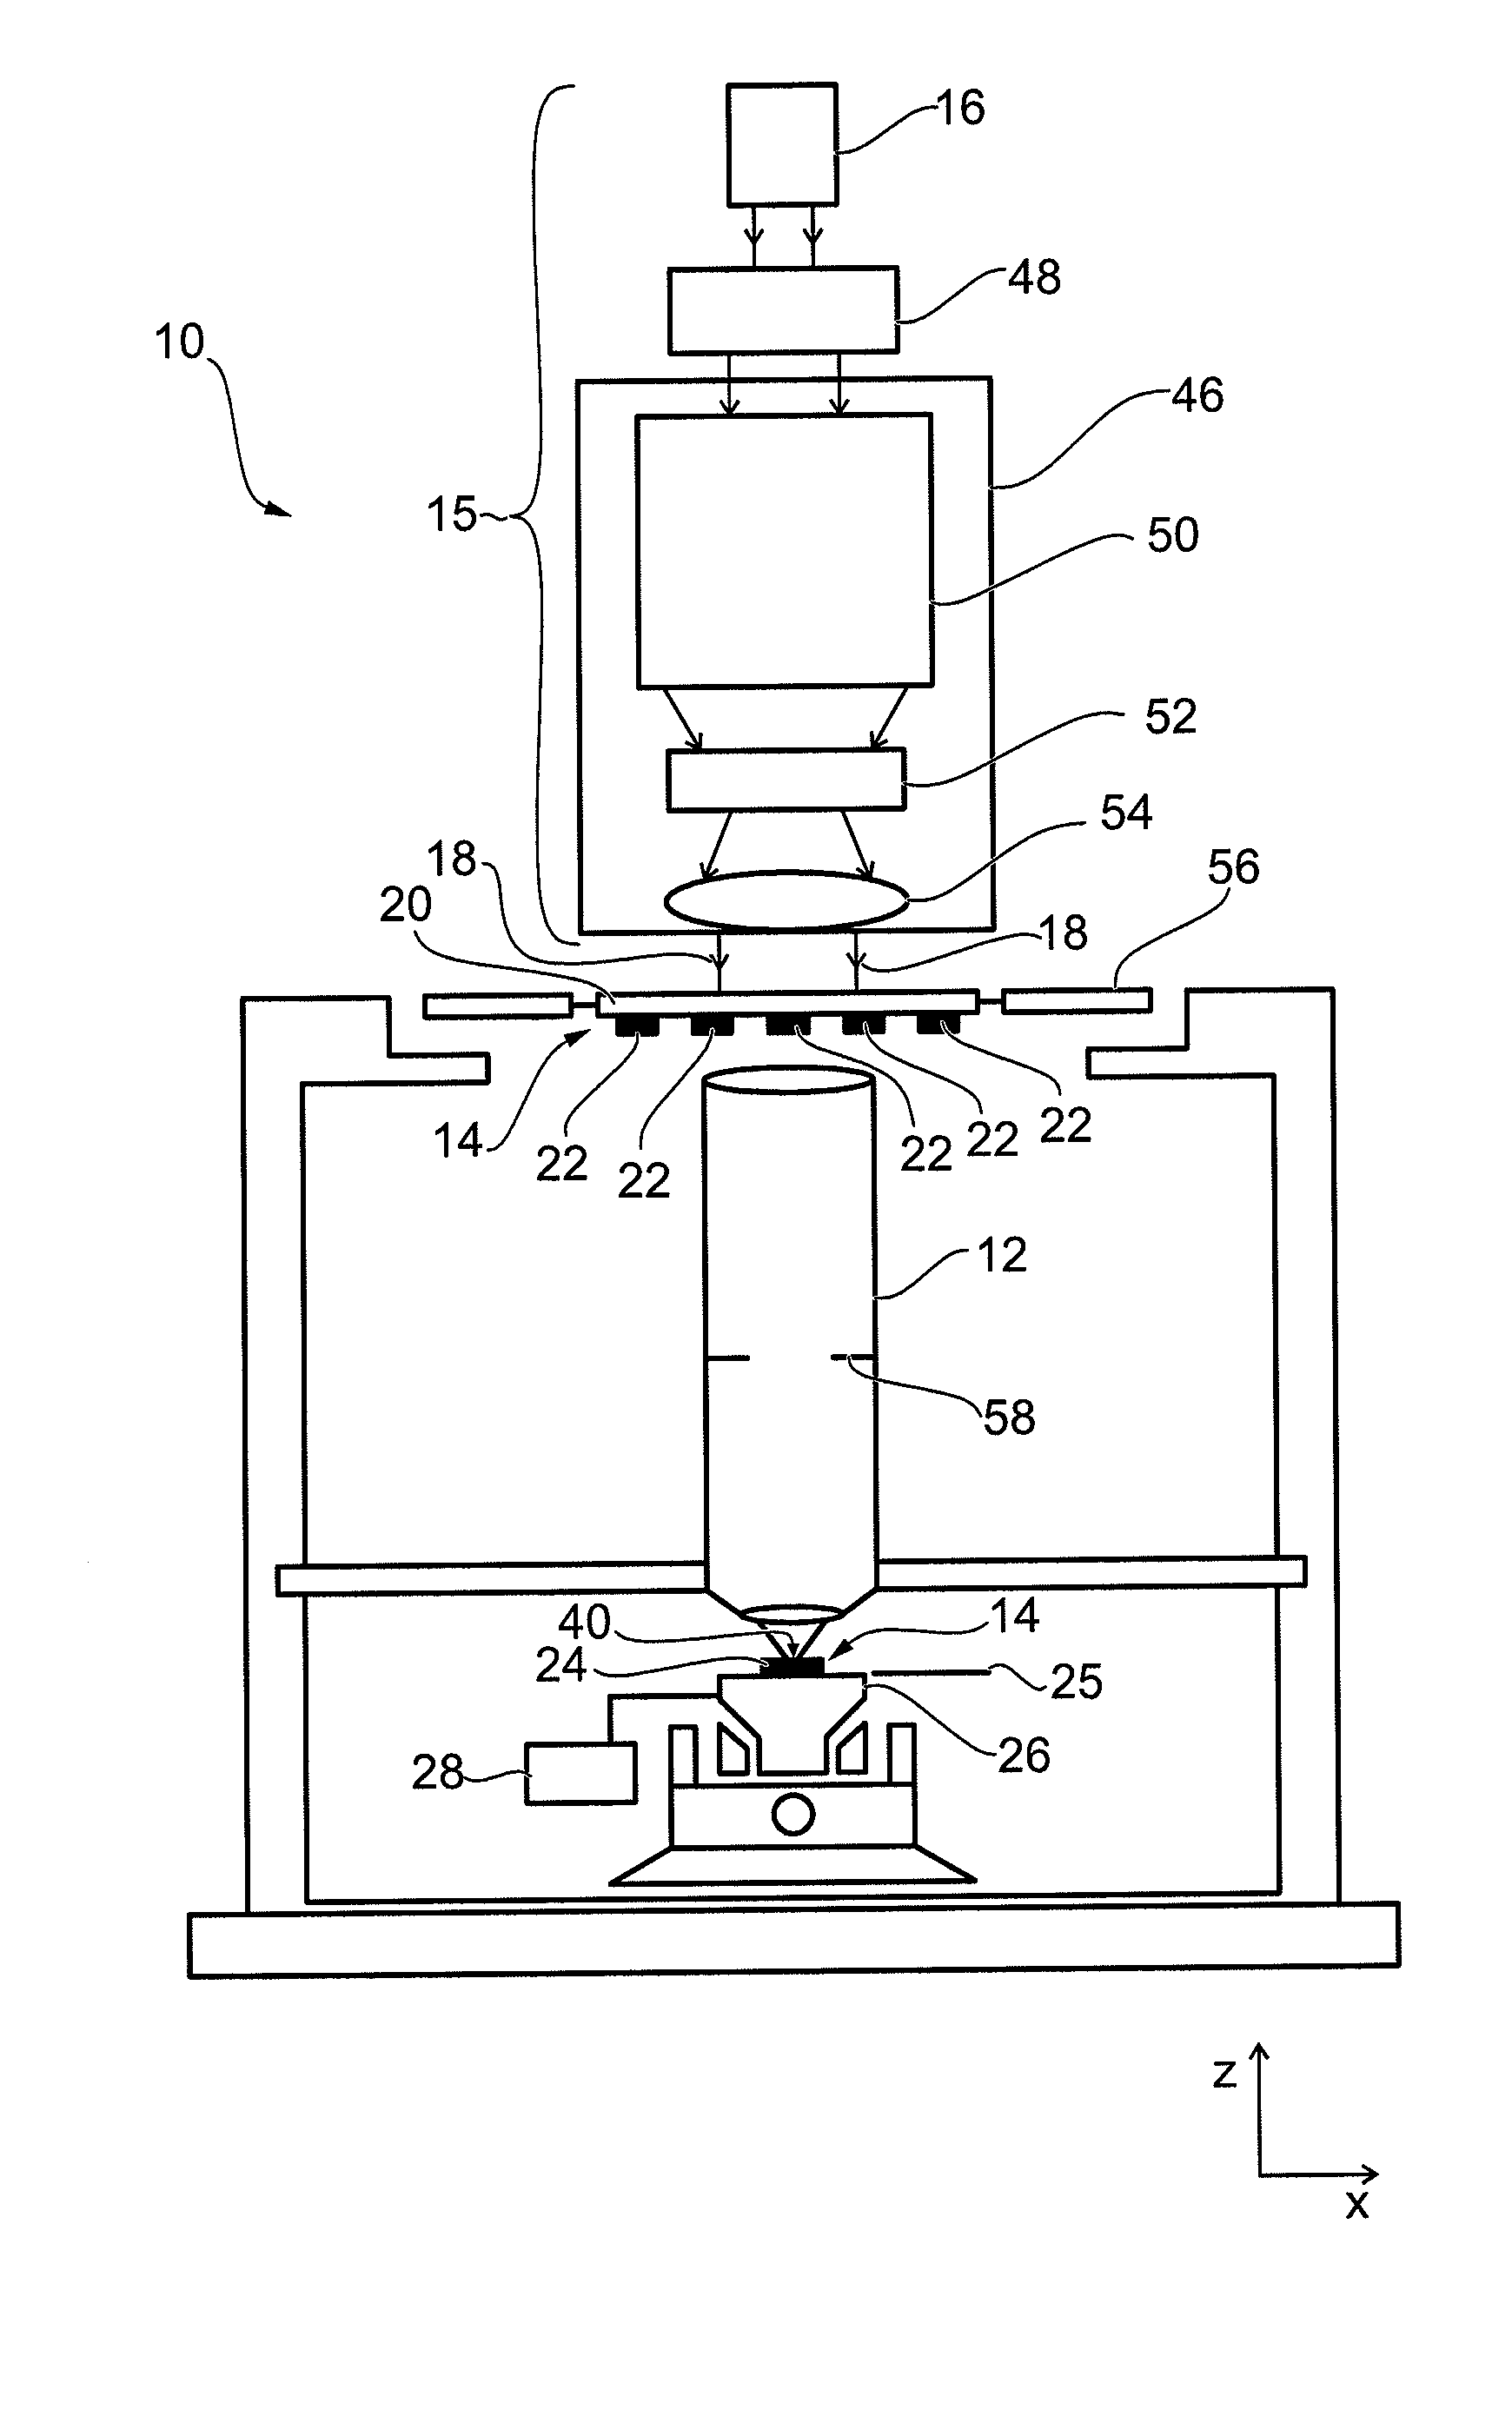 Method and apparatus for measuring scattered light on an optical system